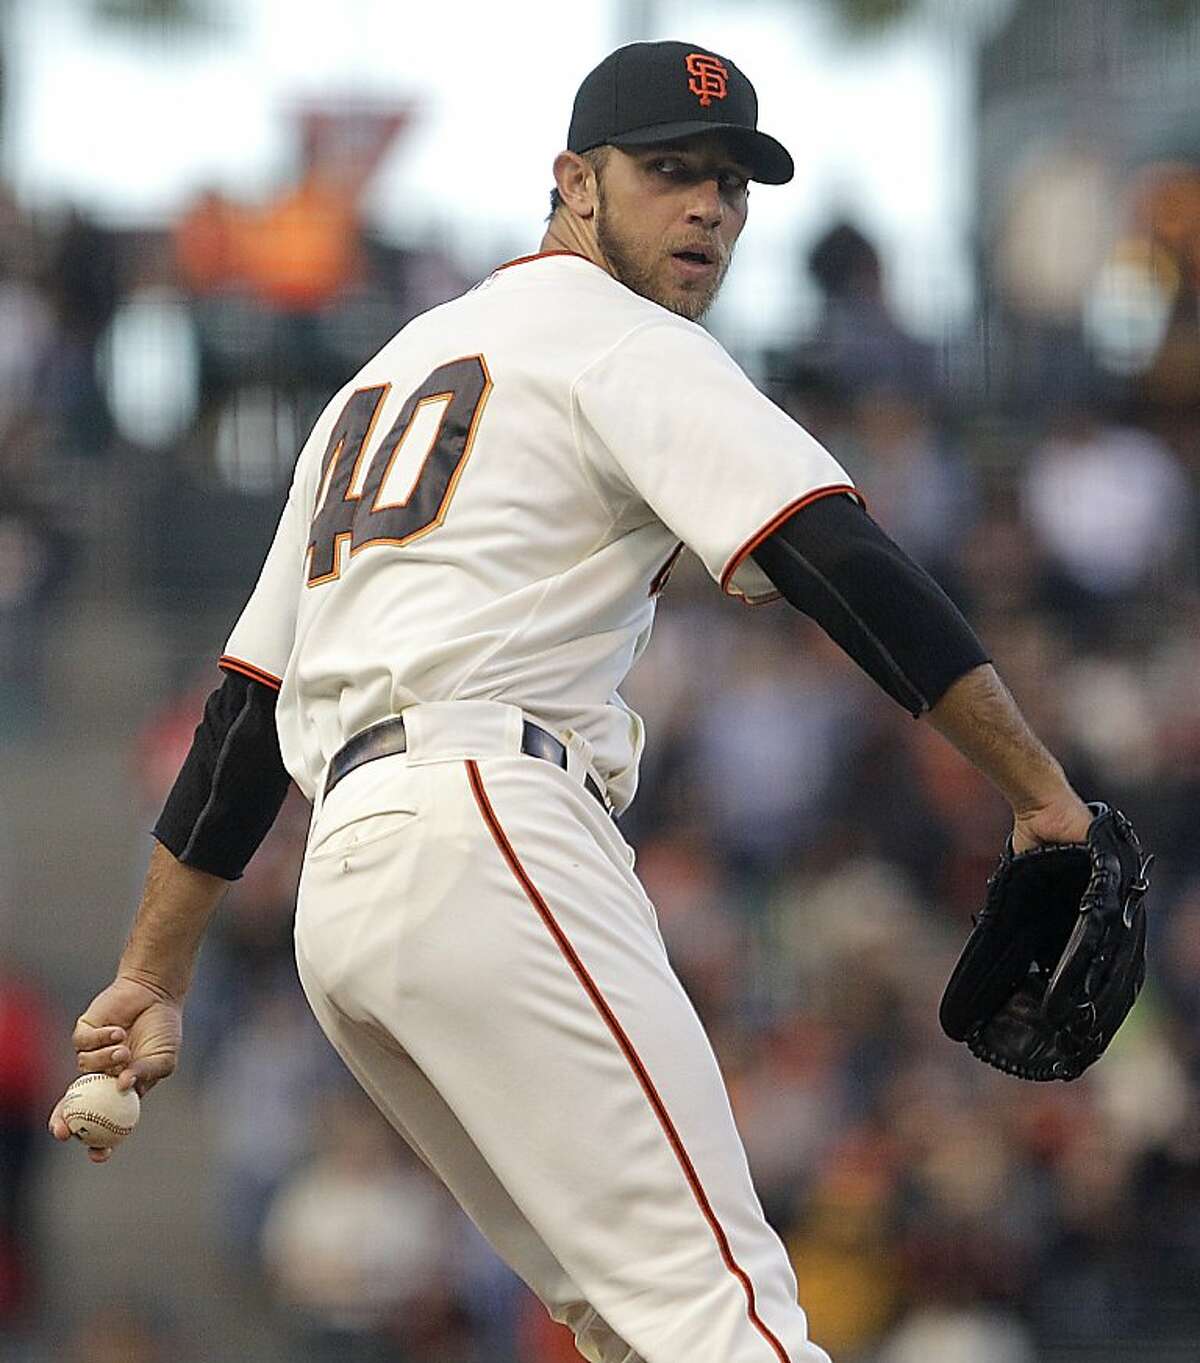 San Francisco Giants' Madison Baumgarner works against the Cincinnati Reds in the first inning of a baseball game on Thursday, June 28, 2012, in San Francisco. (AP Photo/Ben Margot)